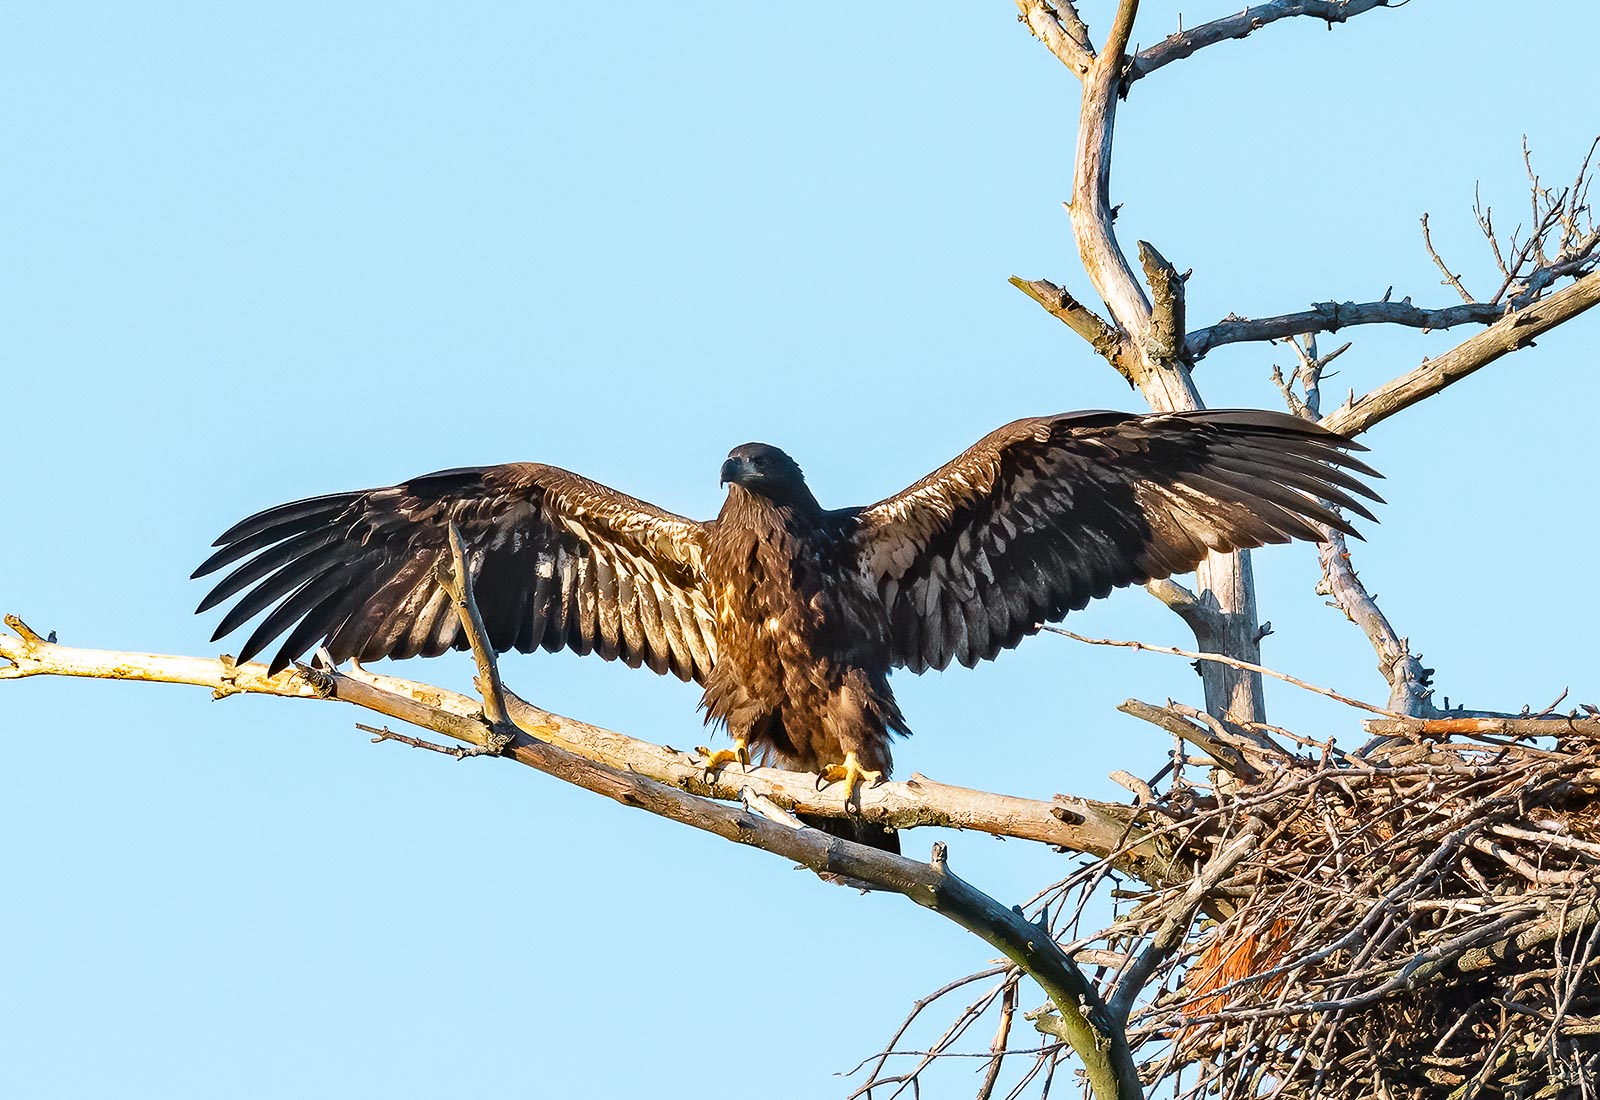 Eaglet spreads its wings while branching